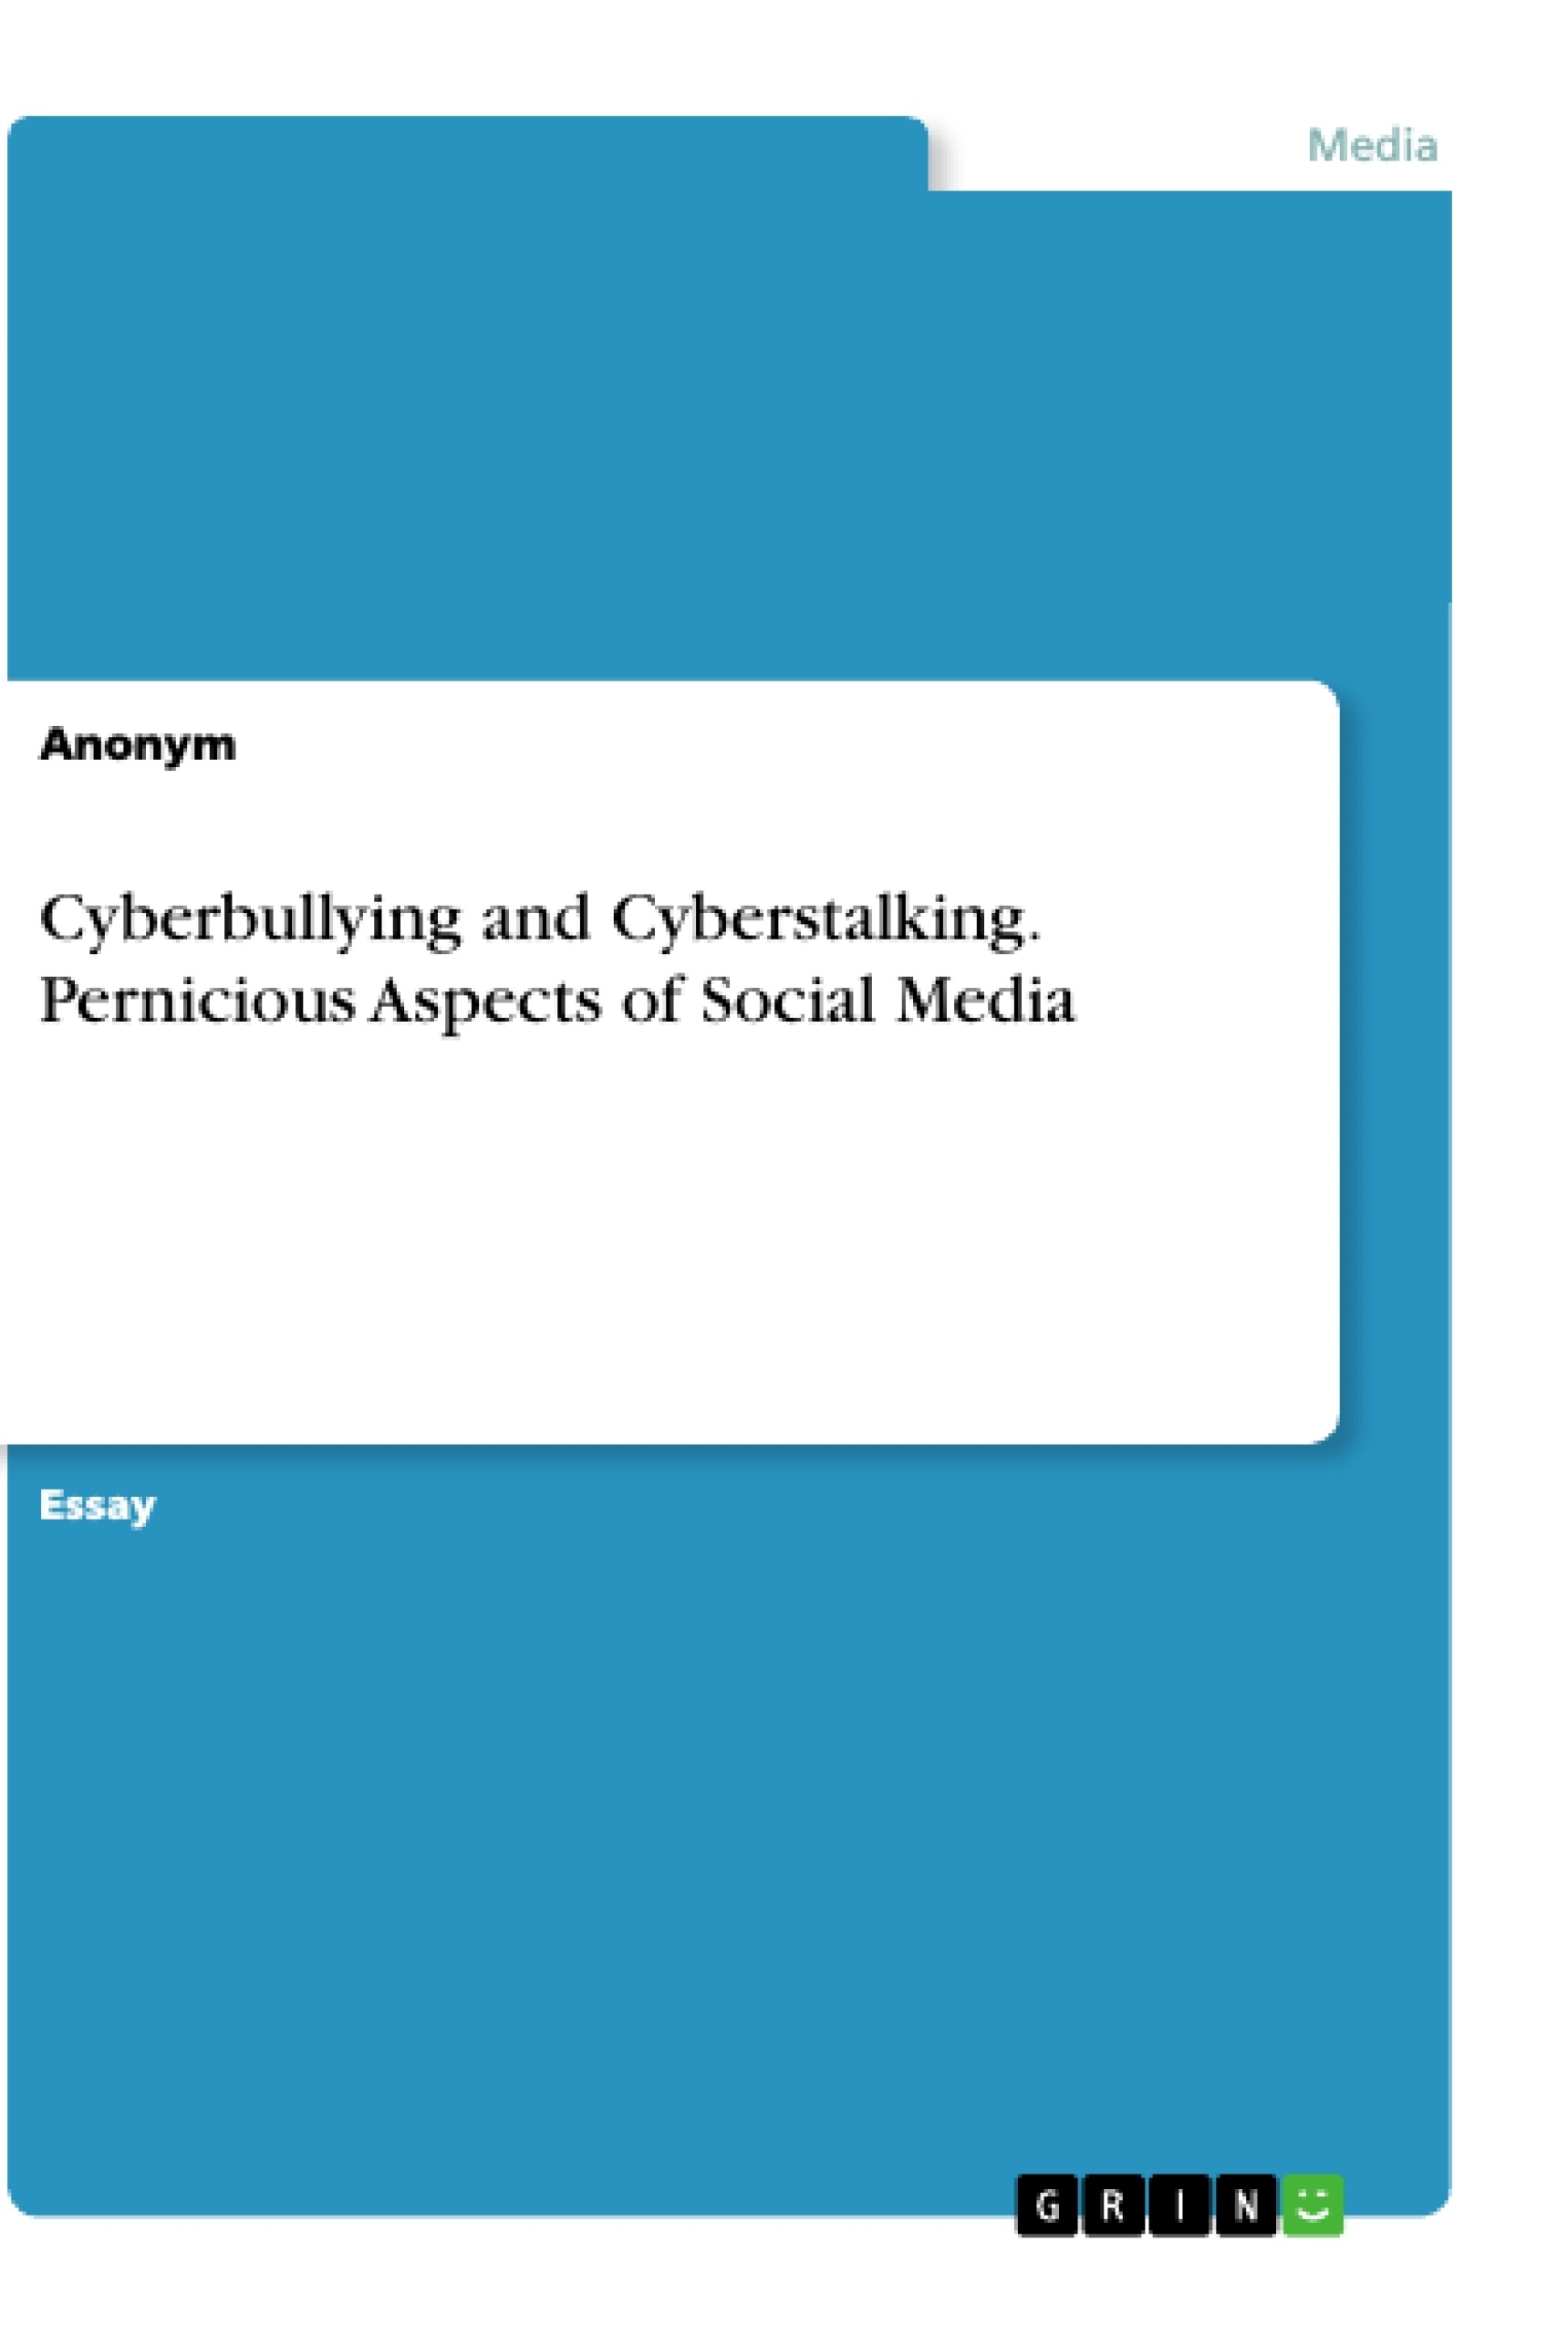 Título: Cyberbullying and Cyberstalking. Pernicious Aspects of Social Media